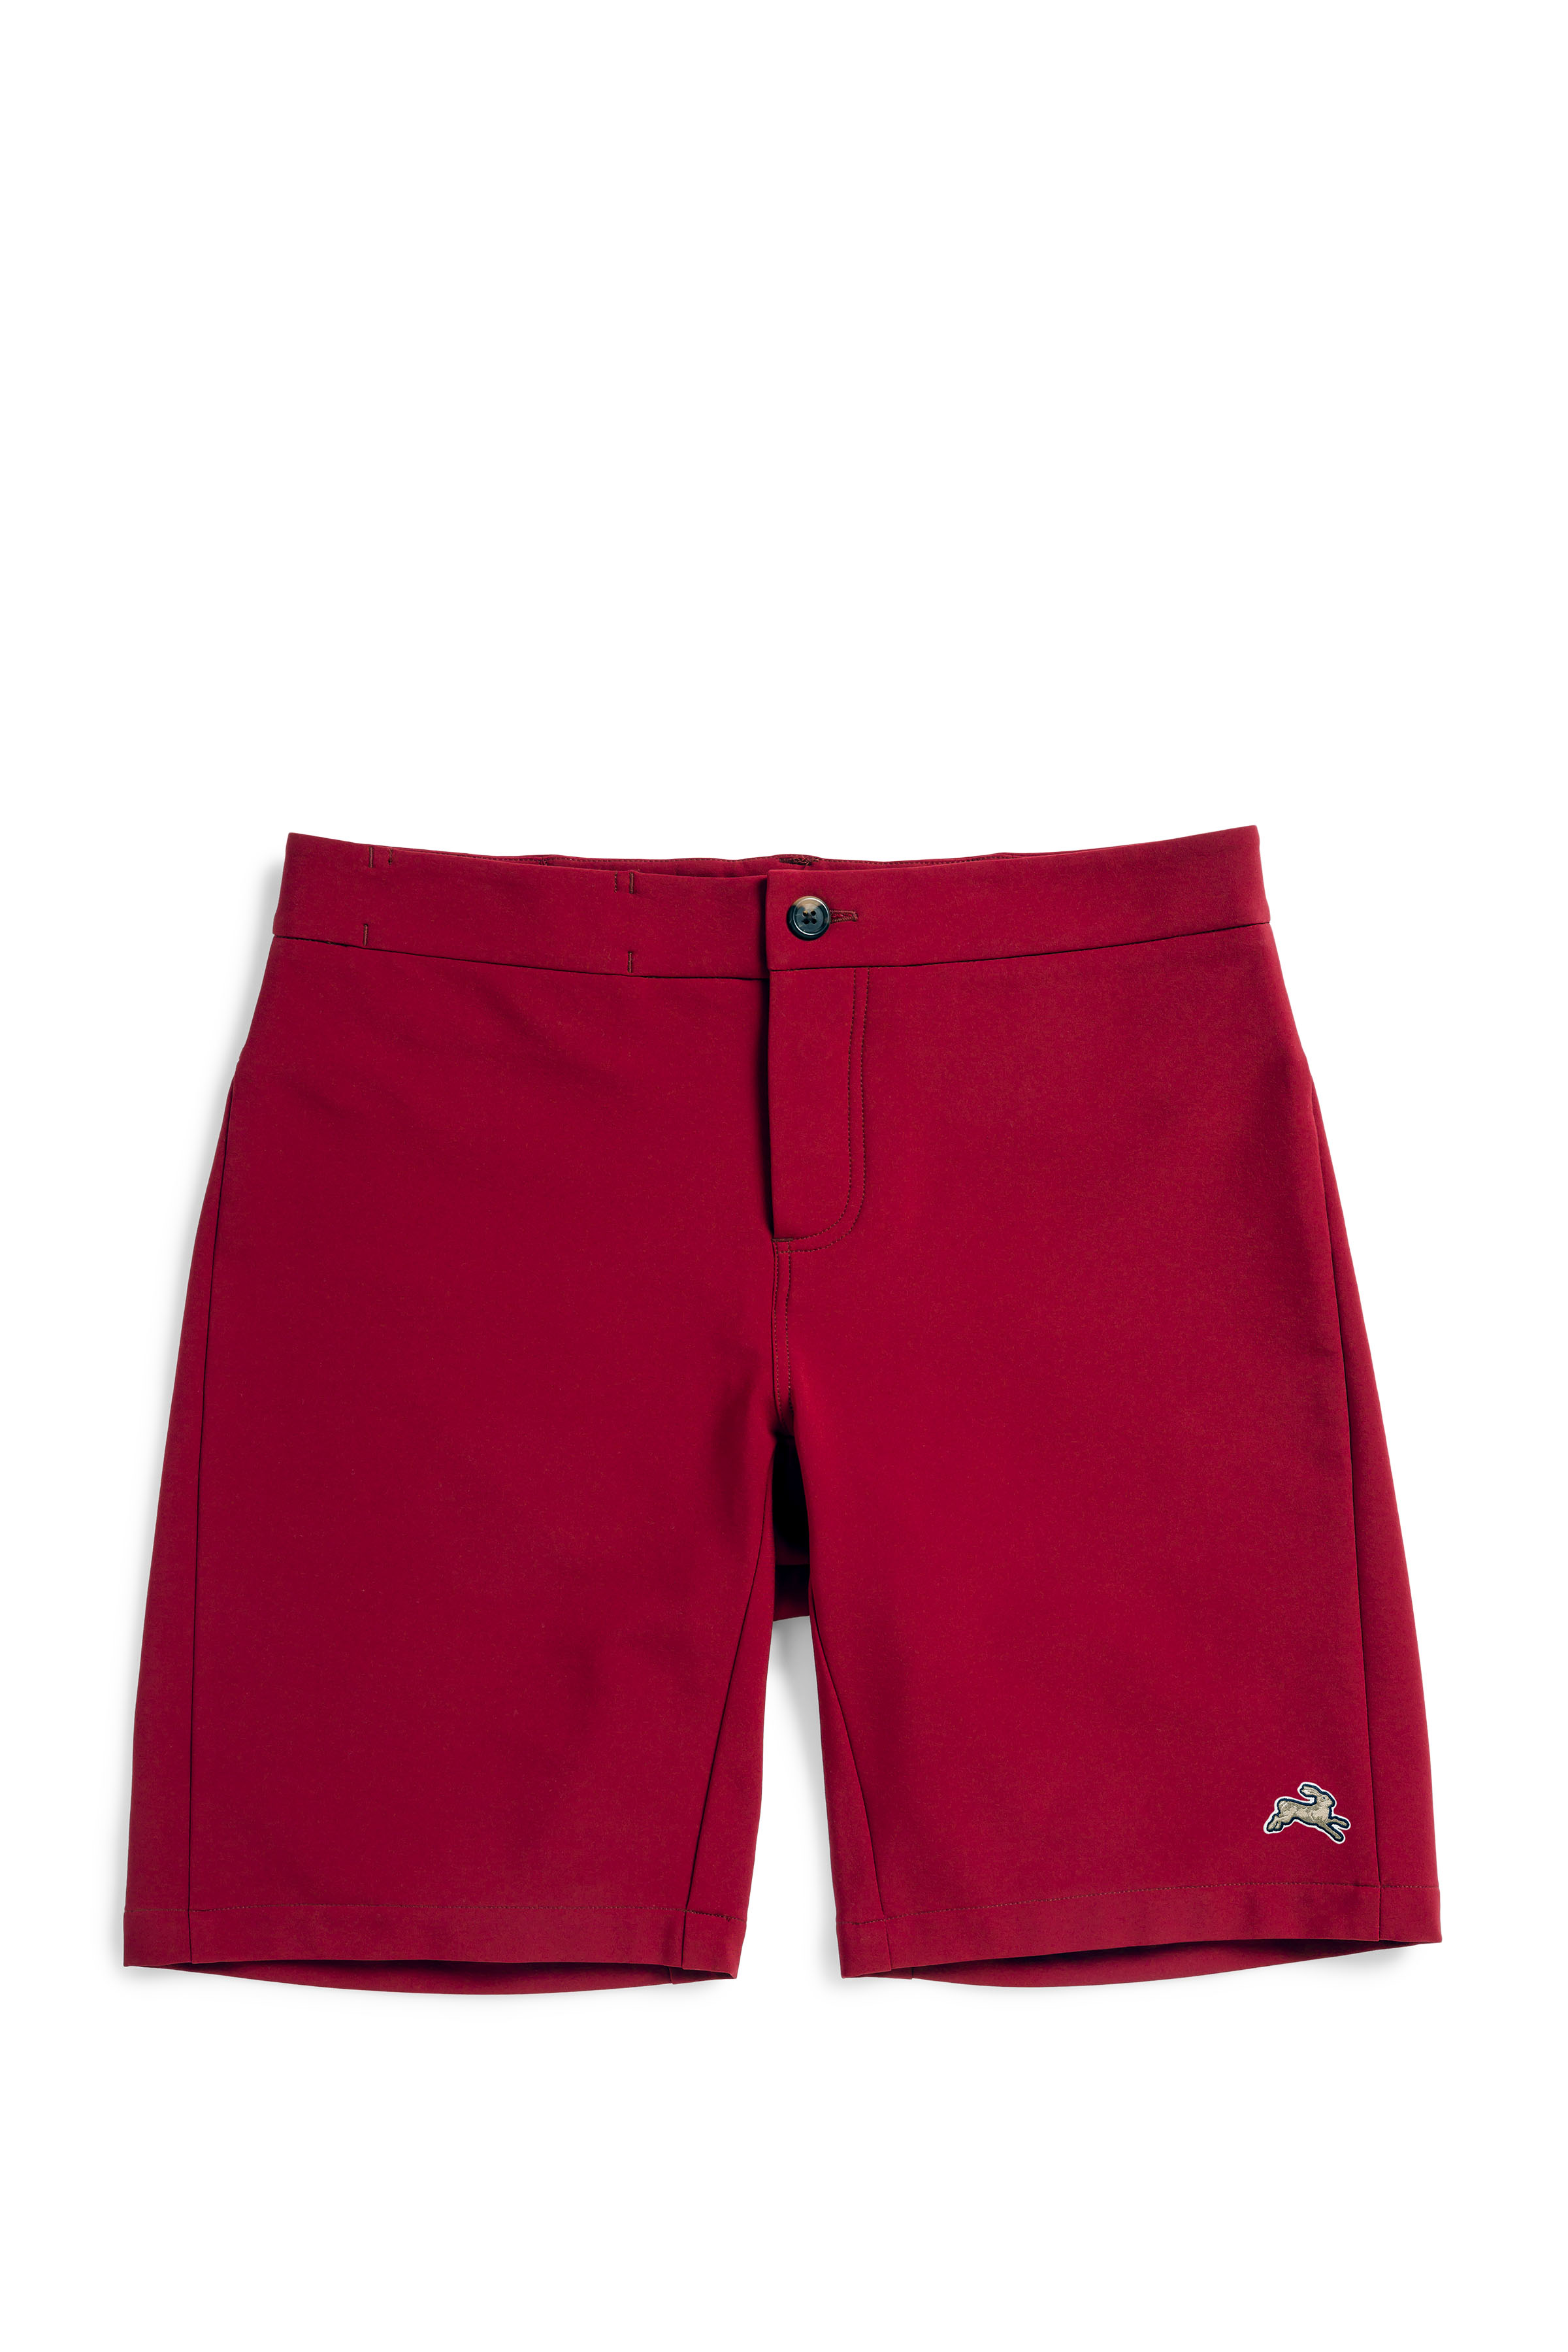 Longfellow Red Front_011 Tracksmith